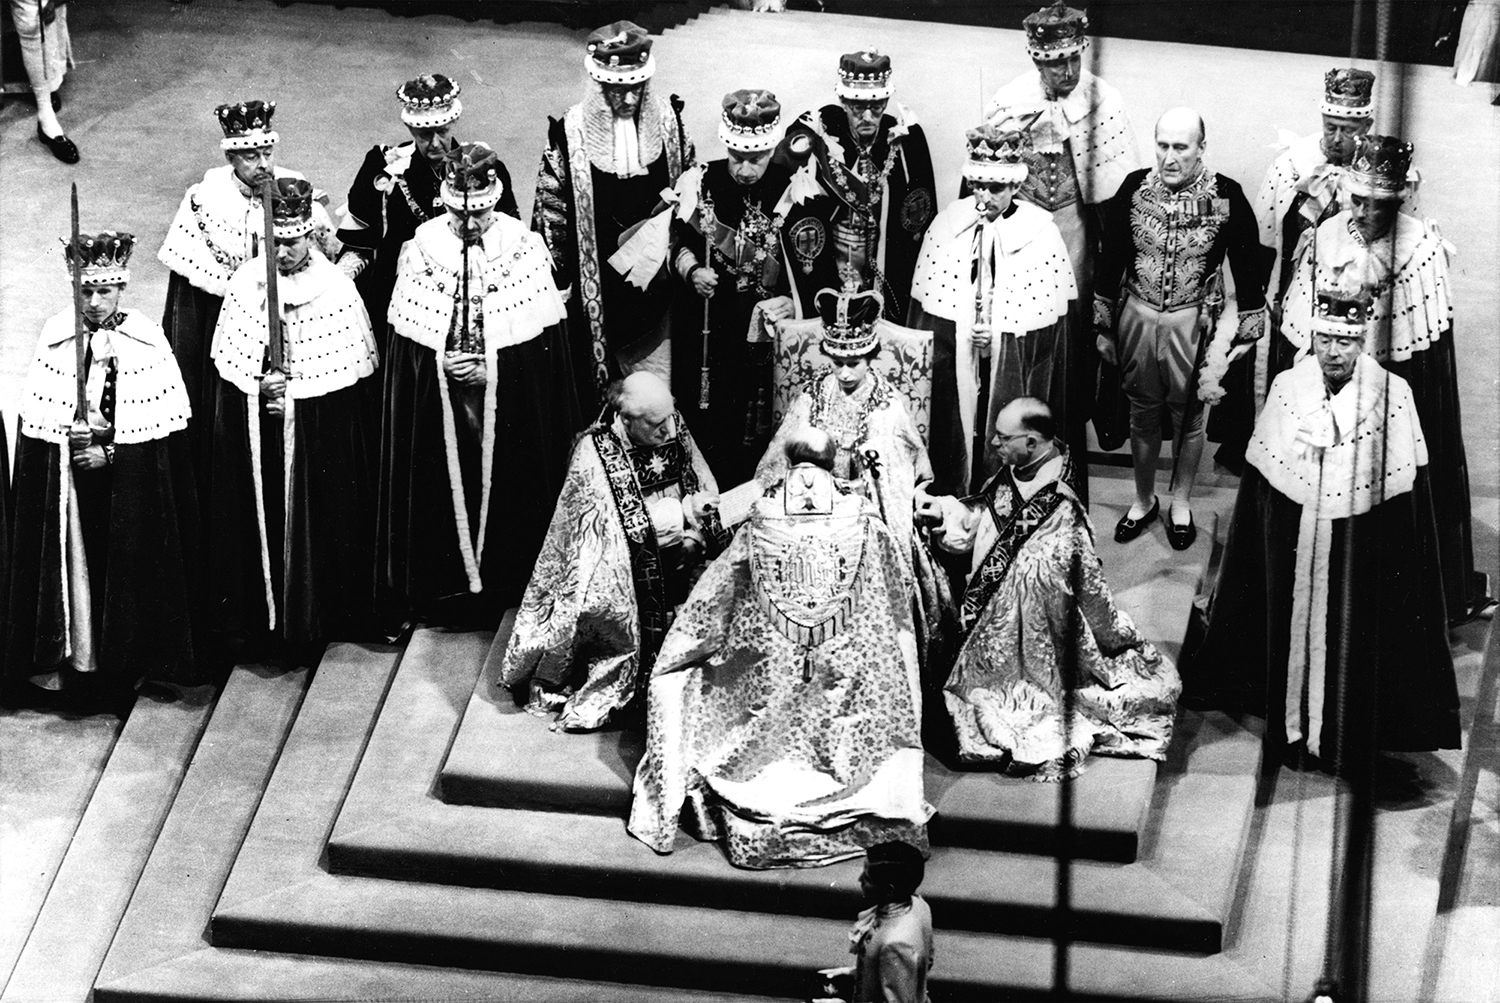 FILE - In this June 2, 1953 file photo, Britain's Queen Elizabeth II, seated on the throne, receives the fealty of the Archbishop of Canterbury, back to camera at center, the Bishop of Durham, left, and the Bishop of Bath and Wells, during her coronation in Westminster Abbey, London. (AP Photo, File)